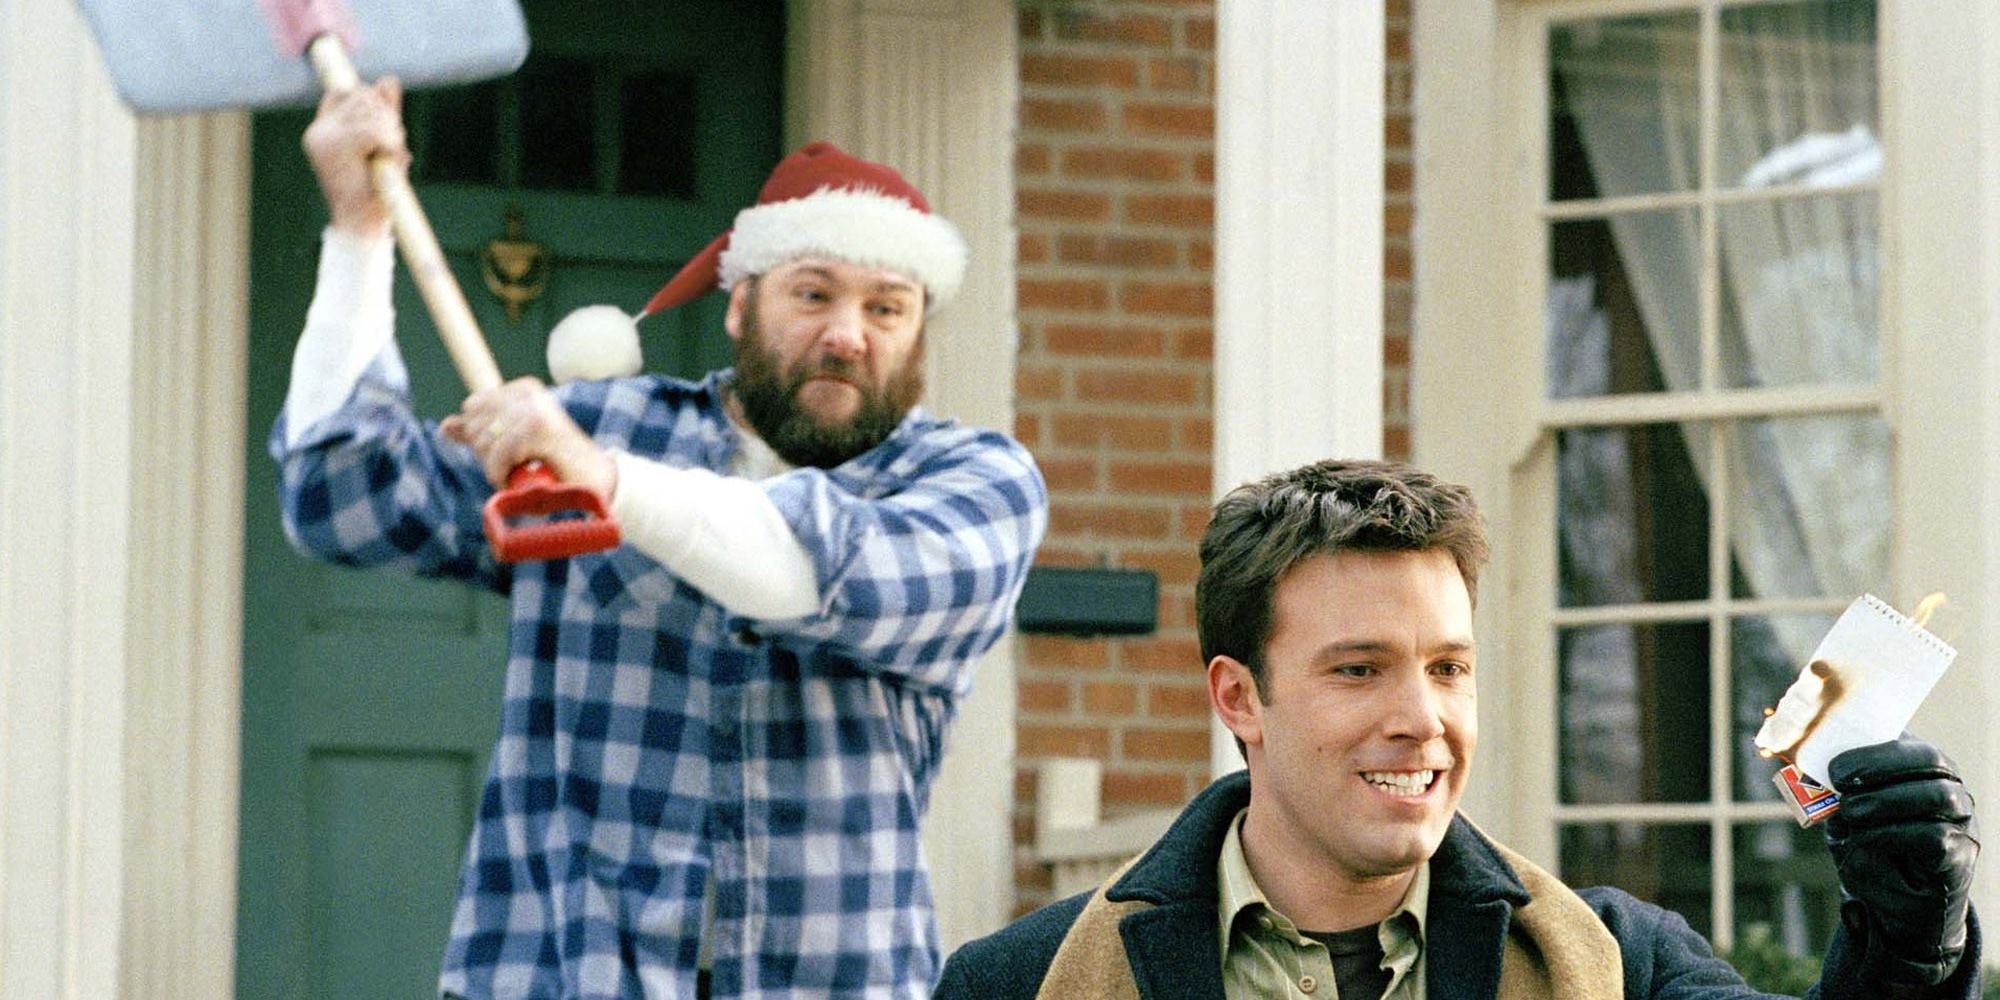 James Gandolfini about to hit Ben Affleck with a shovel in Surviving Christmas